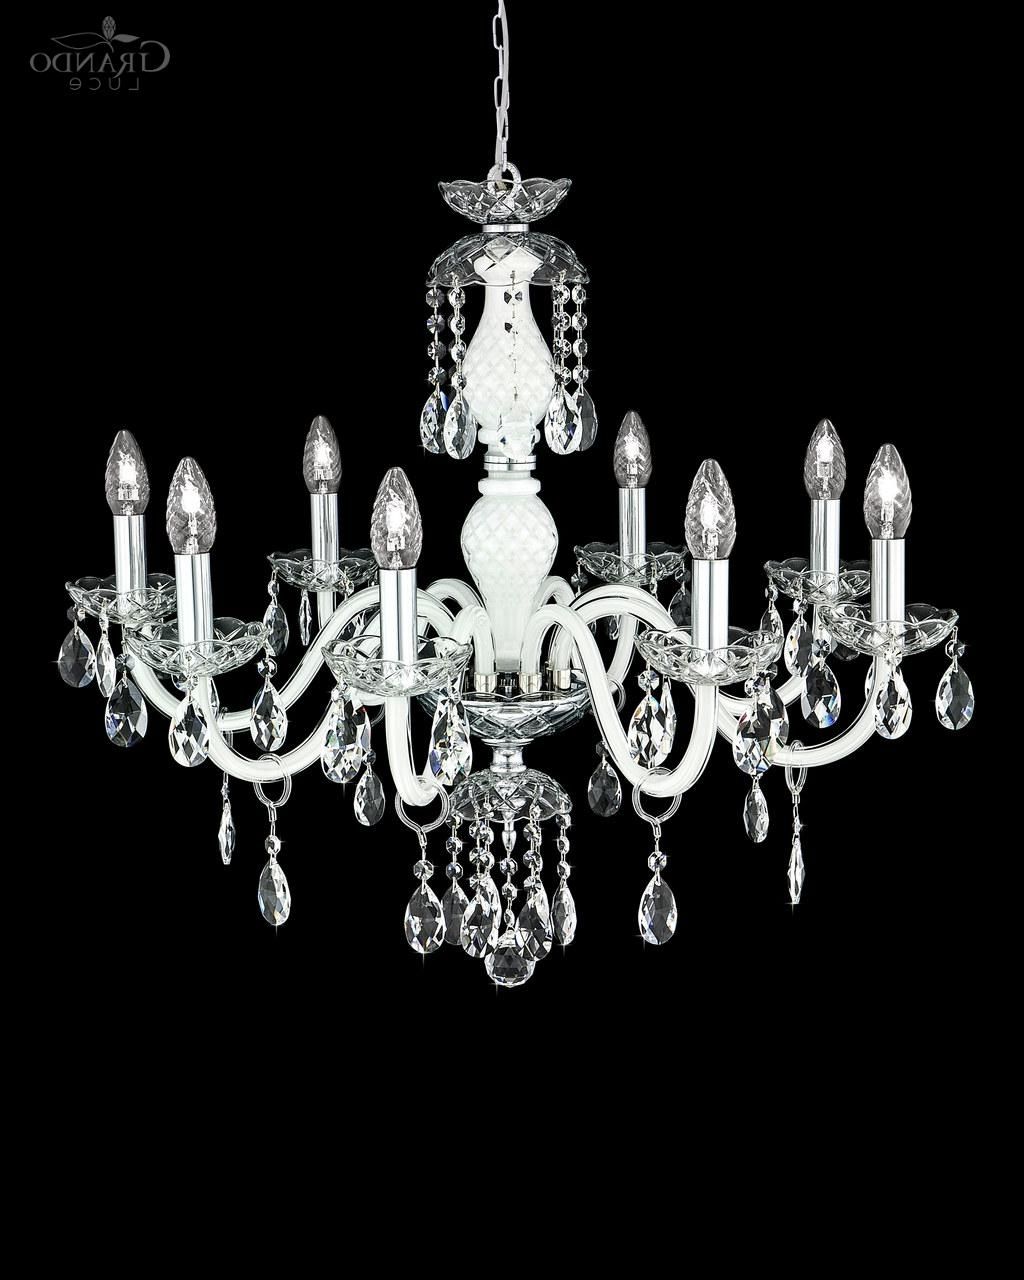 104/ch 8 Chrome White Crystal Chandelier With Swrovski Spectra Intended For Well Liked White Chandeliers (View 17 of 20)